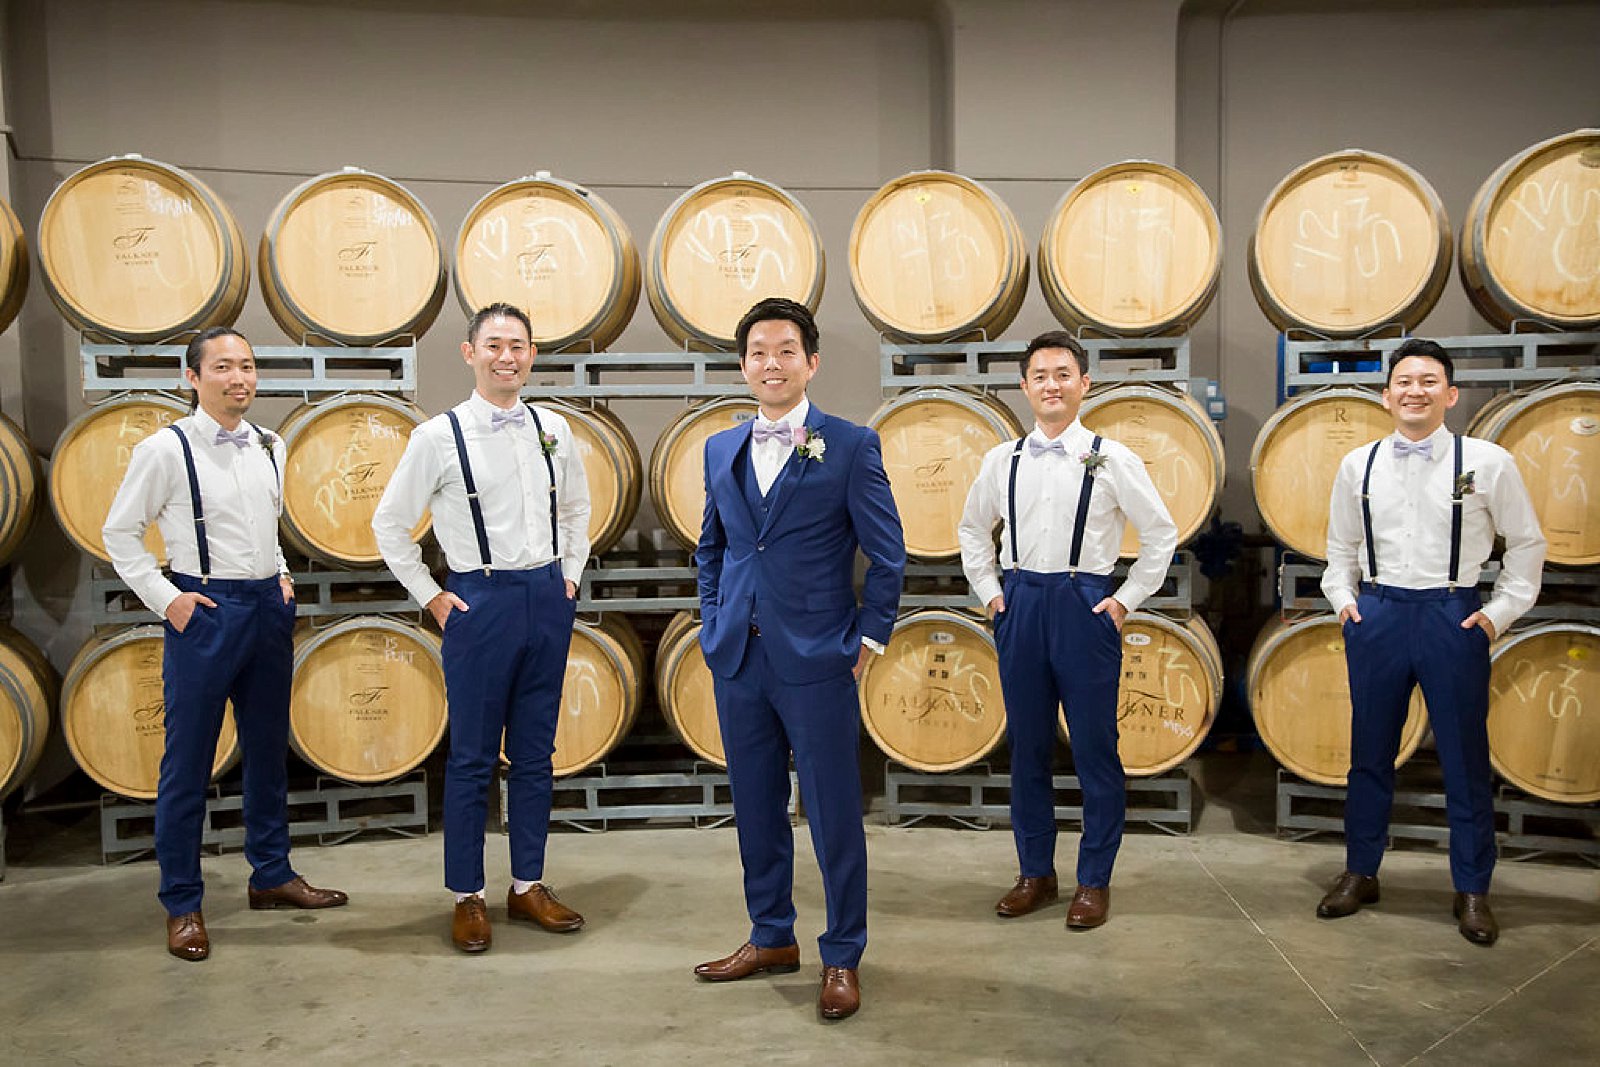 Groom in Falkner Winery barrel room photographed by Randi Michelle Photography